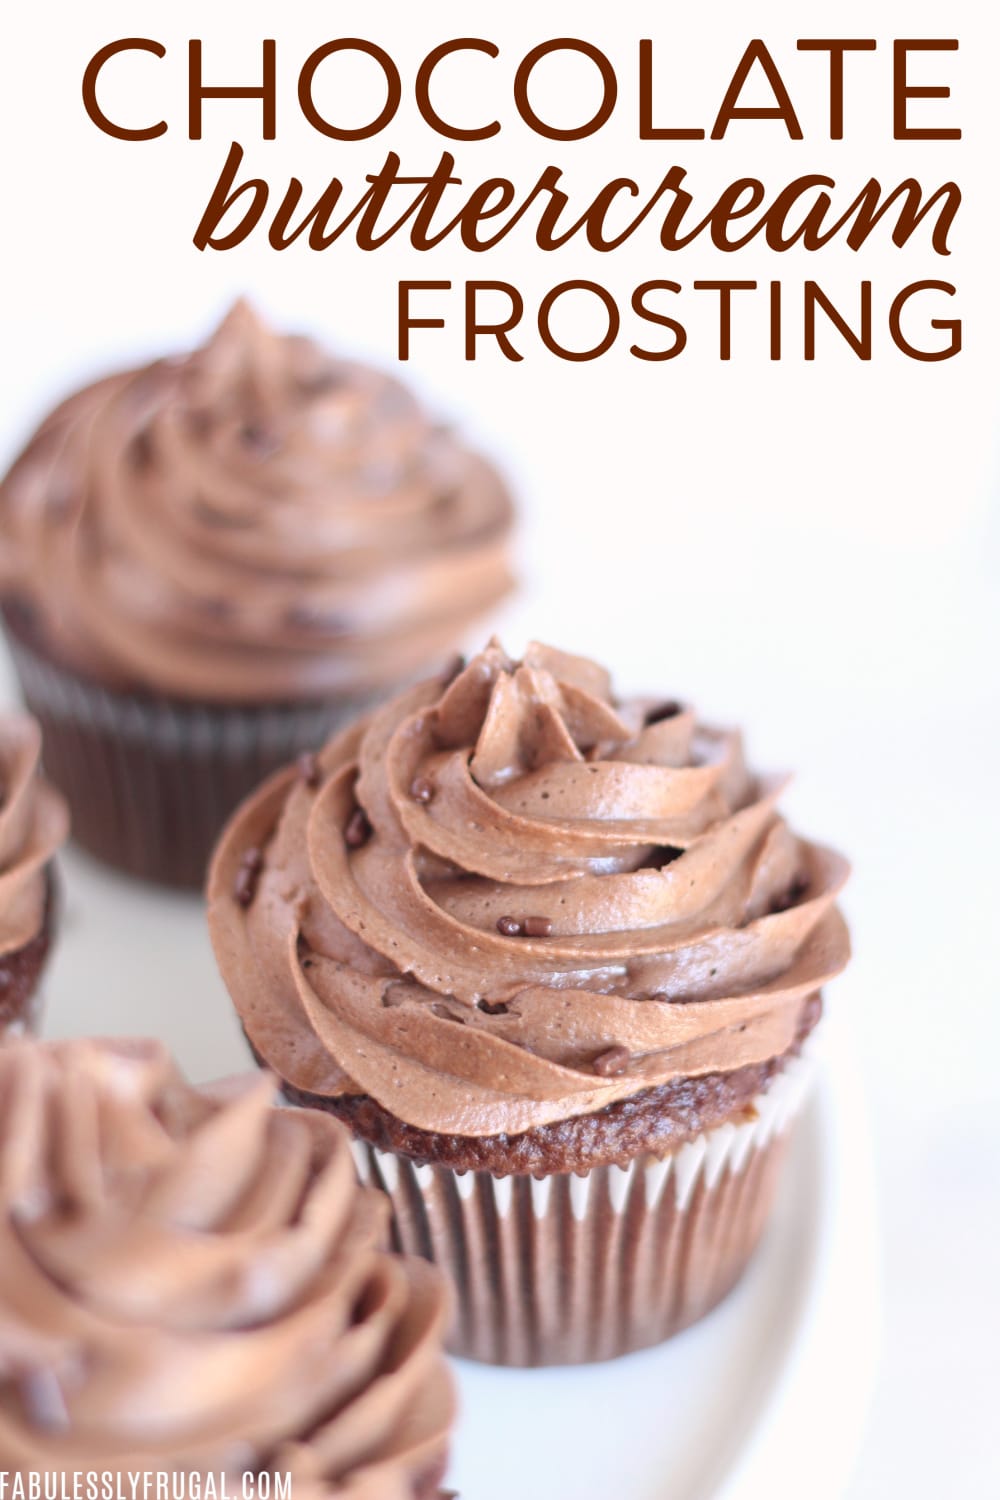 Easy chocolate buttercream frosting recipe